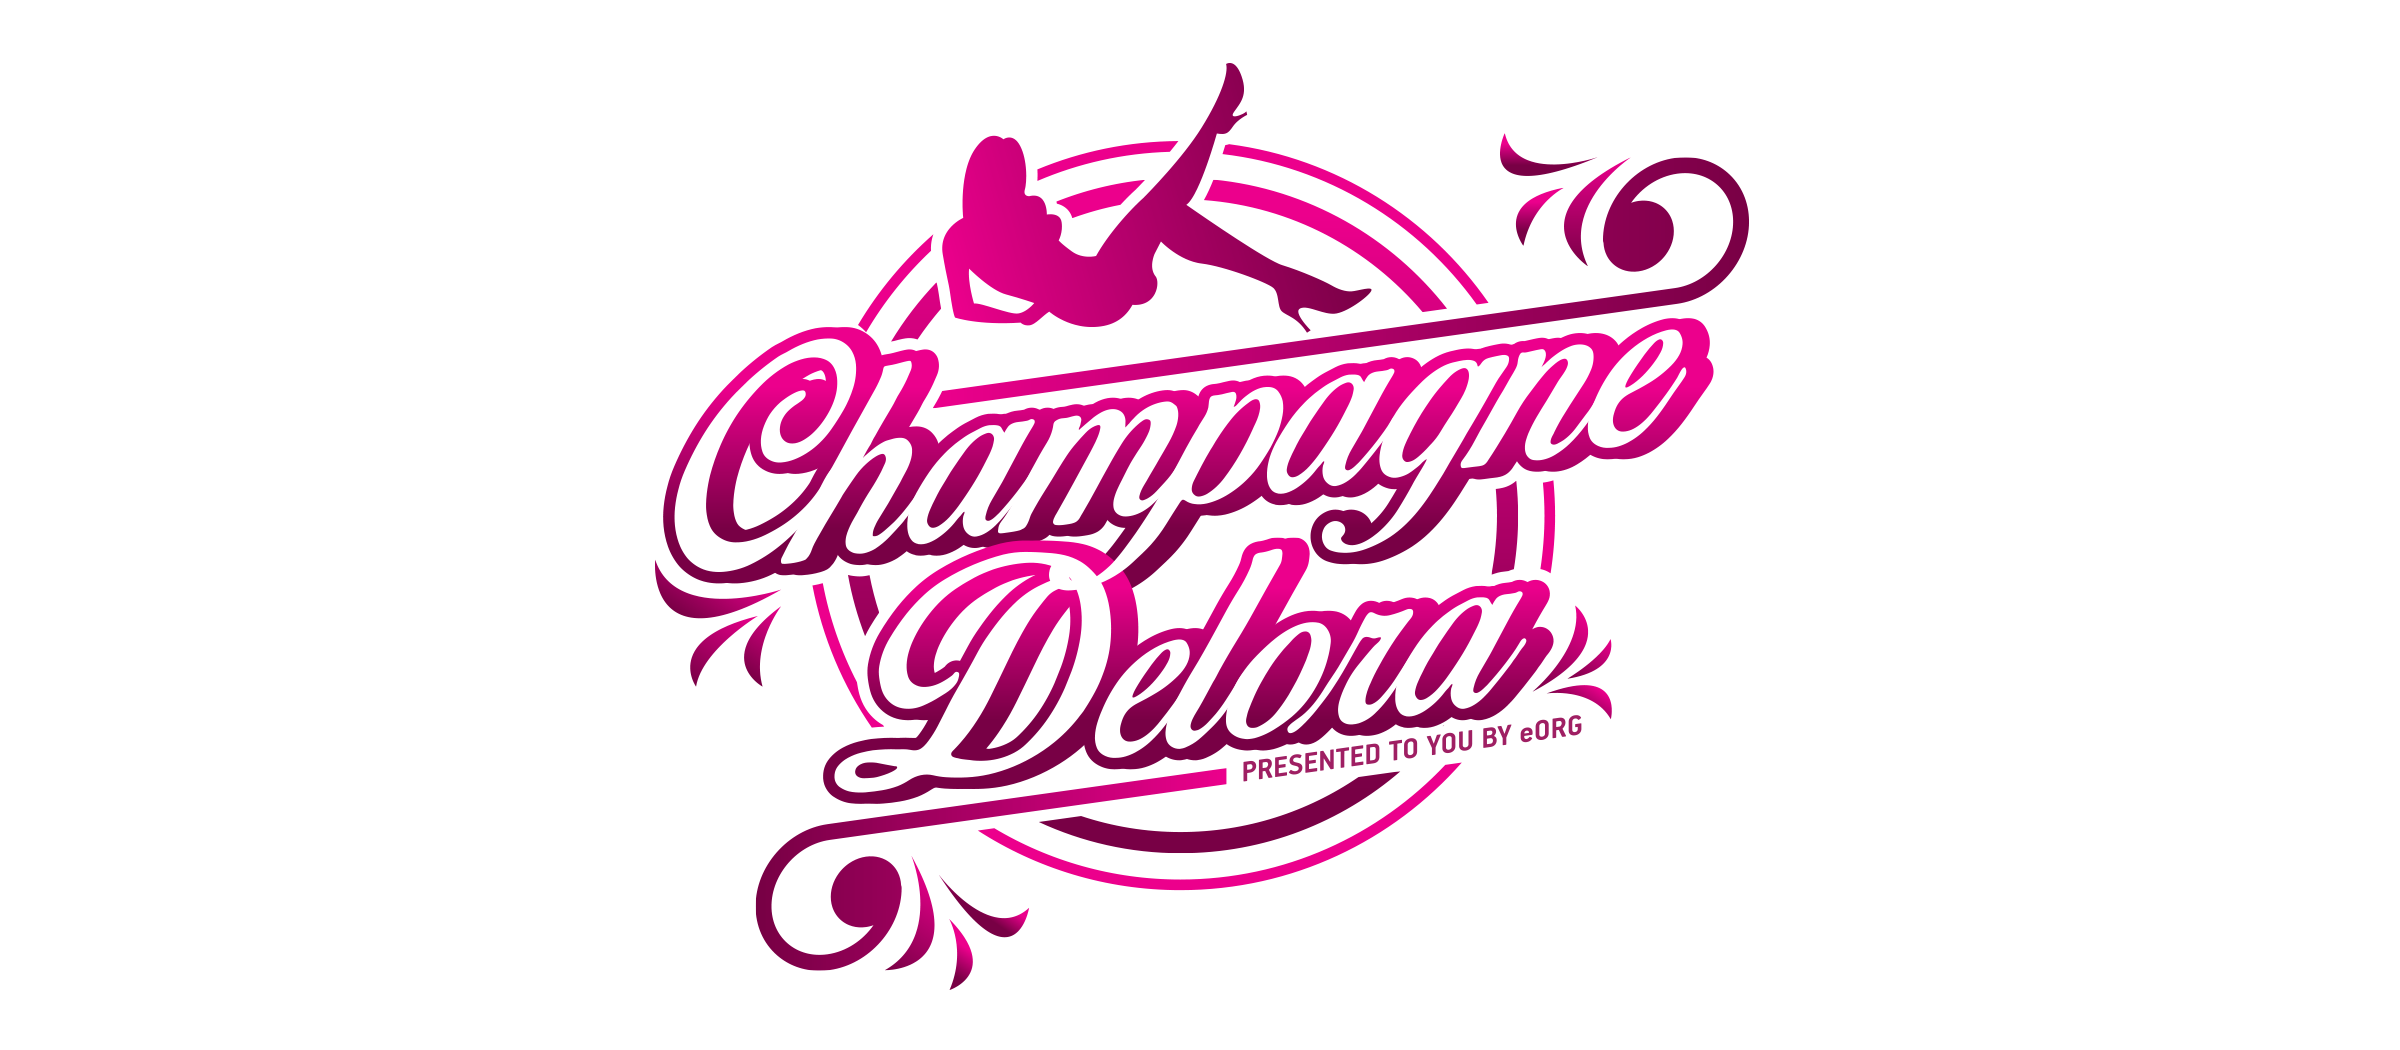 Champagne Delora was designed to create a satisfying sexual experience for both men and women.